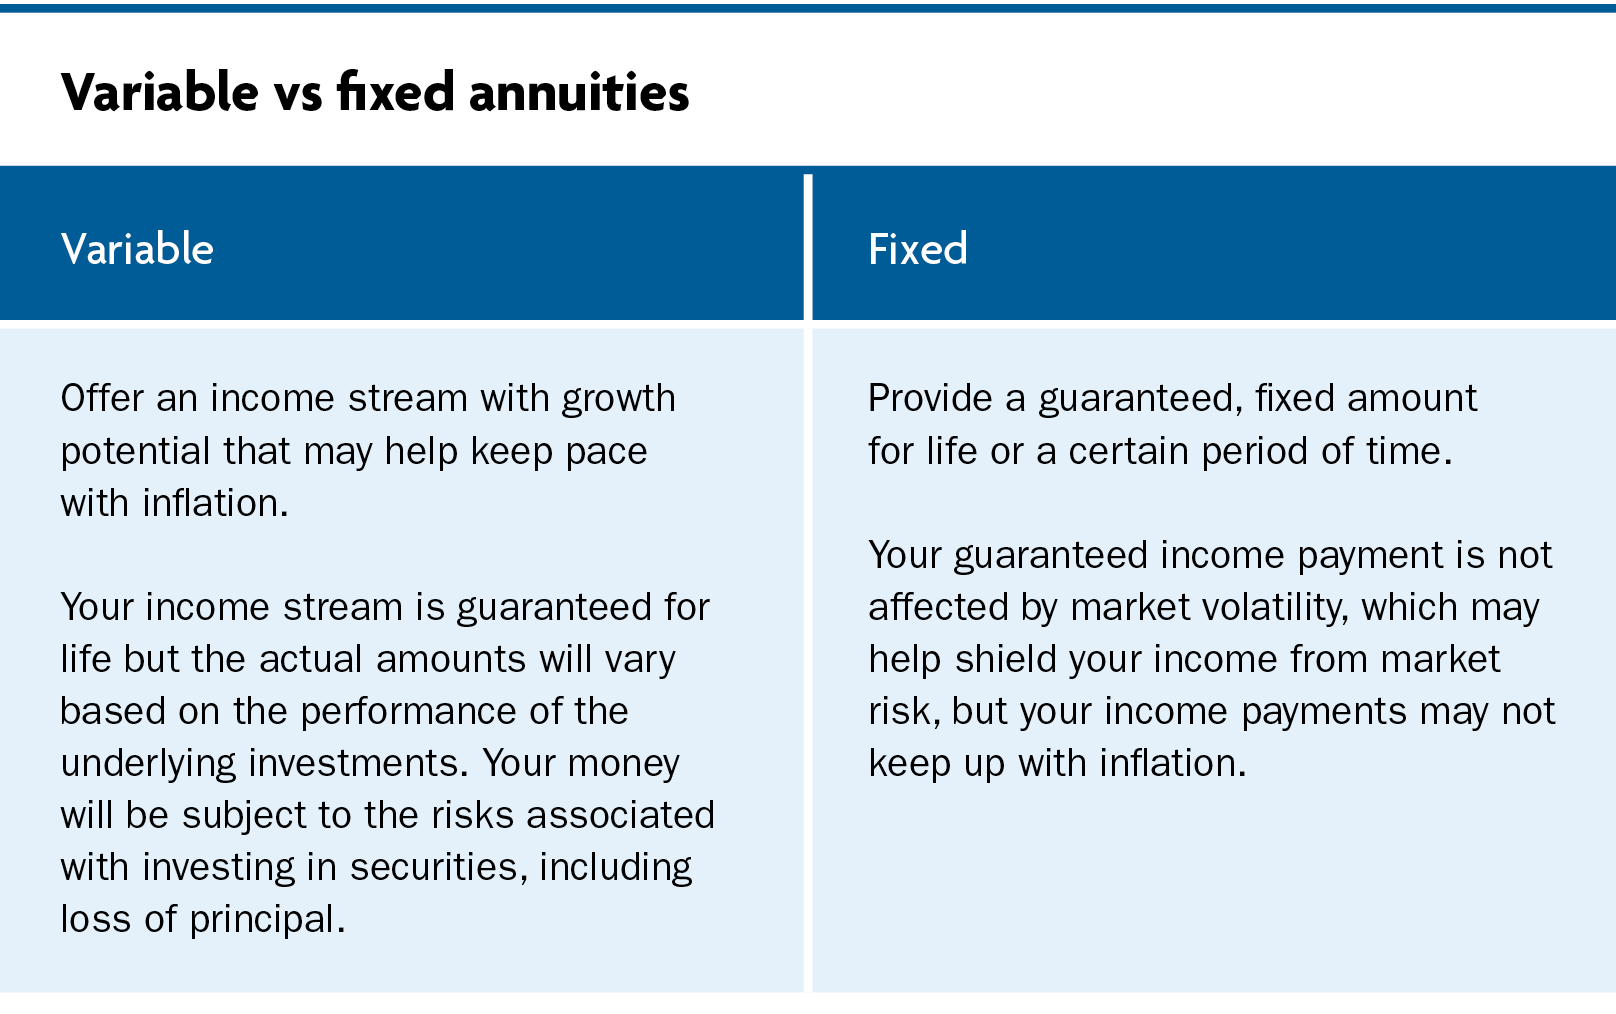 Variable annuities offer an income stream with growth potential that may help keep pace with inflation. Your income stream is guaranteed for  life but the actual amounts will vary based on the performance of underlying investments. Your money will be subject to the risks associated with investing in securities, including loss of principal. Fixed annuities provide a guaranteed, fixed amount for life or a certain period of time. Your guaranteed income payment is not affect by market volatility, which may help shield your income from market risk, but your income payments may not keep up with inflation